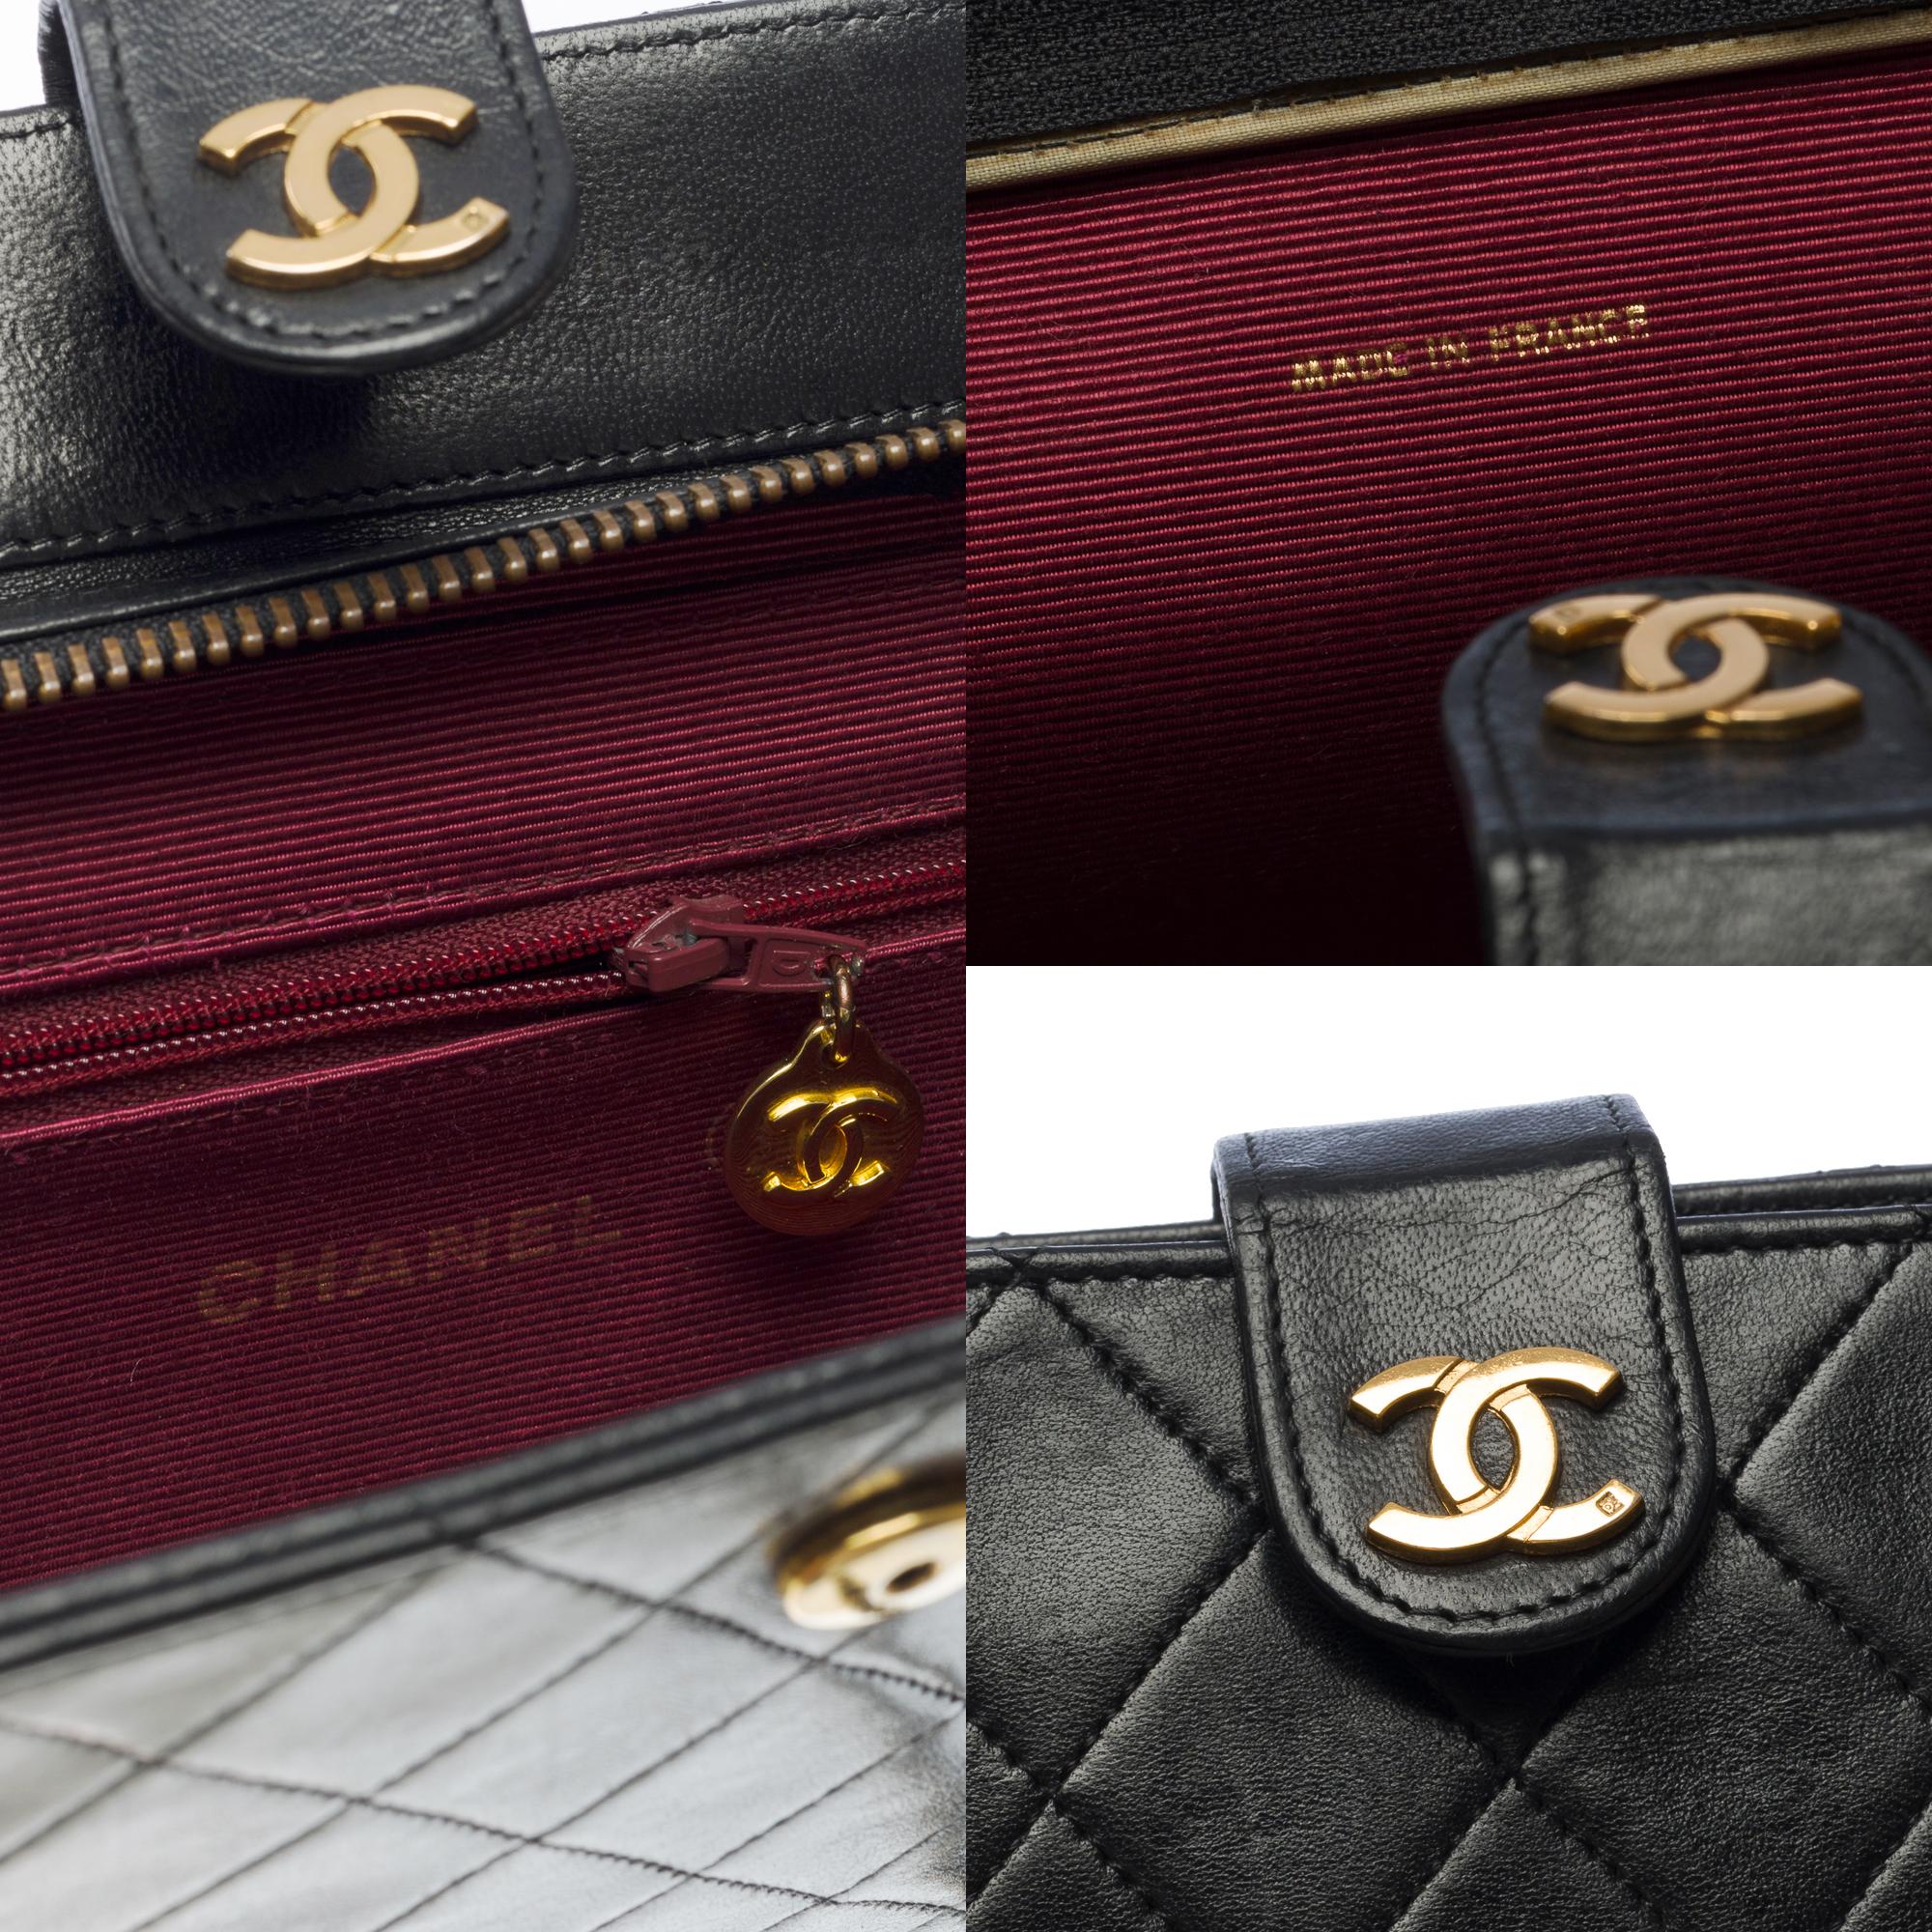 Gorgeous Chanel Classic vintage shoulder bag in black lambskin leather, GHW 2